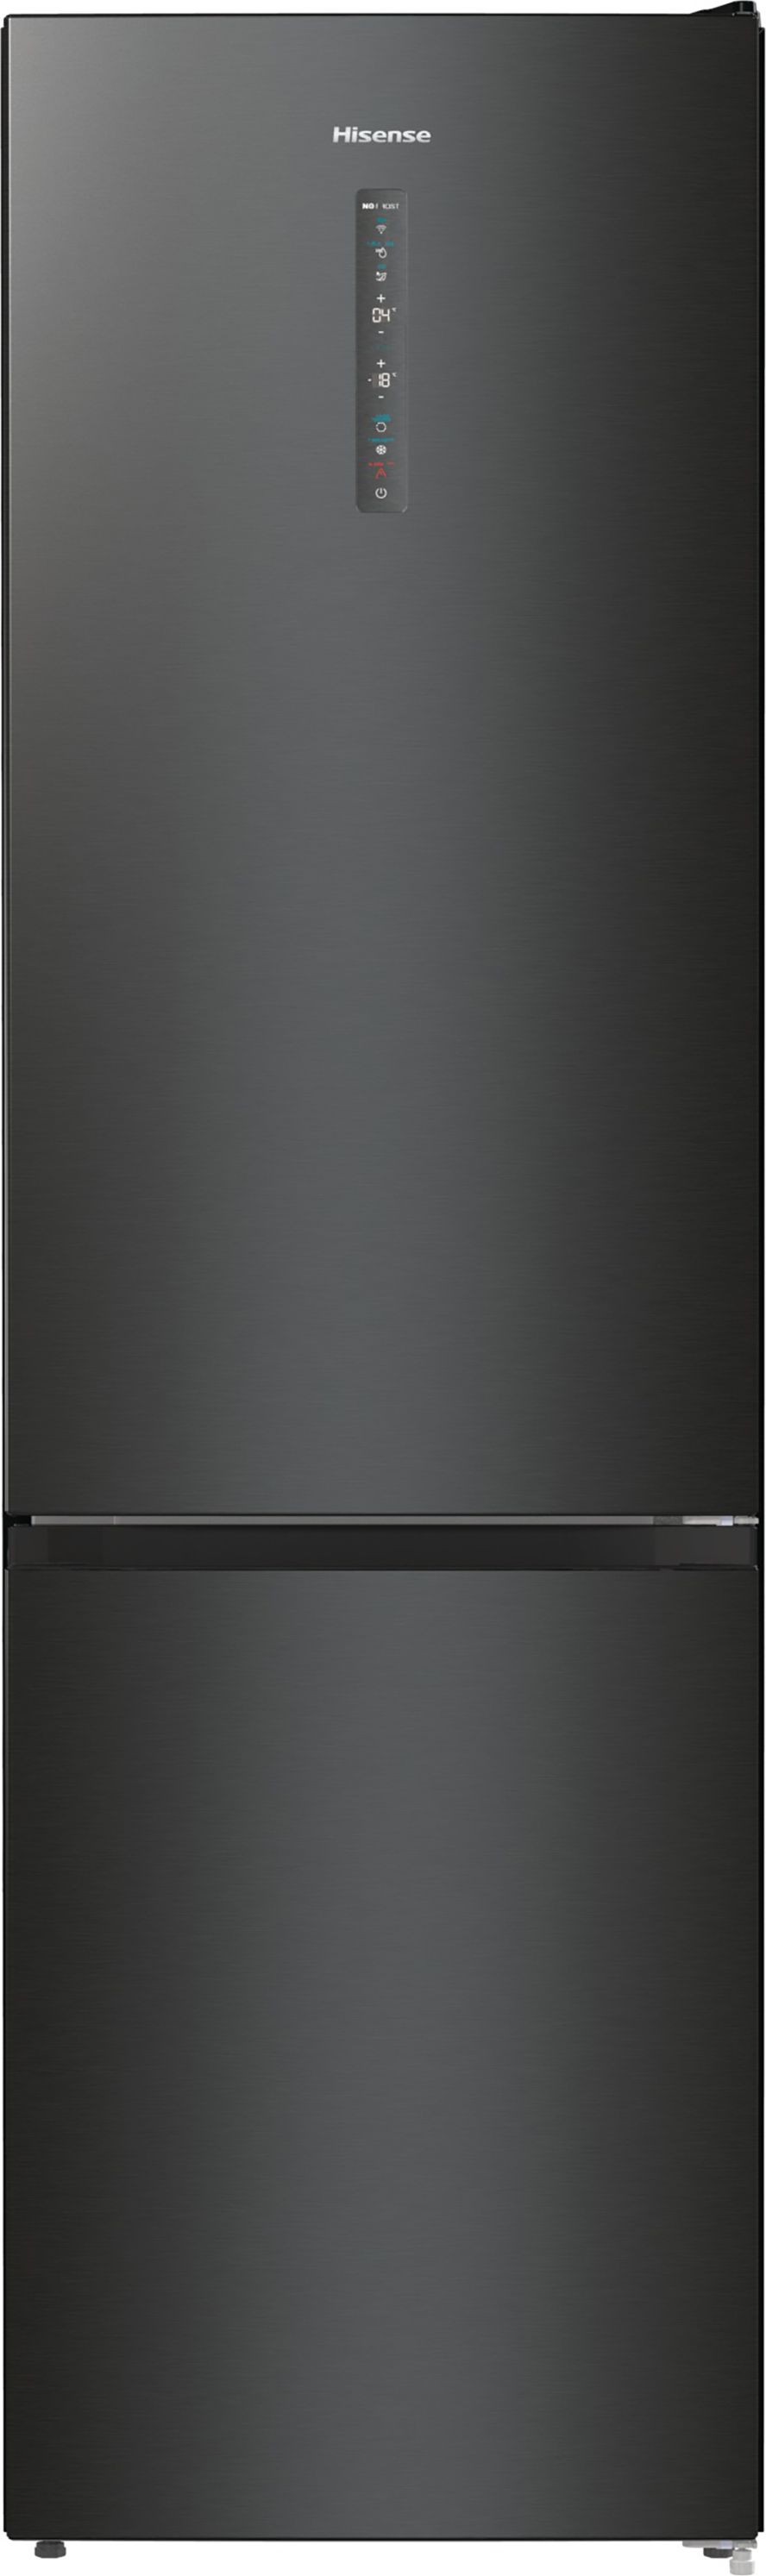 Hisense RB470N4SFCUK Wifi Connected 60/40 Frost Free Fridge Freezer - Stainless Steel / Black - C Rated, Stainless Steel